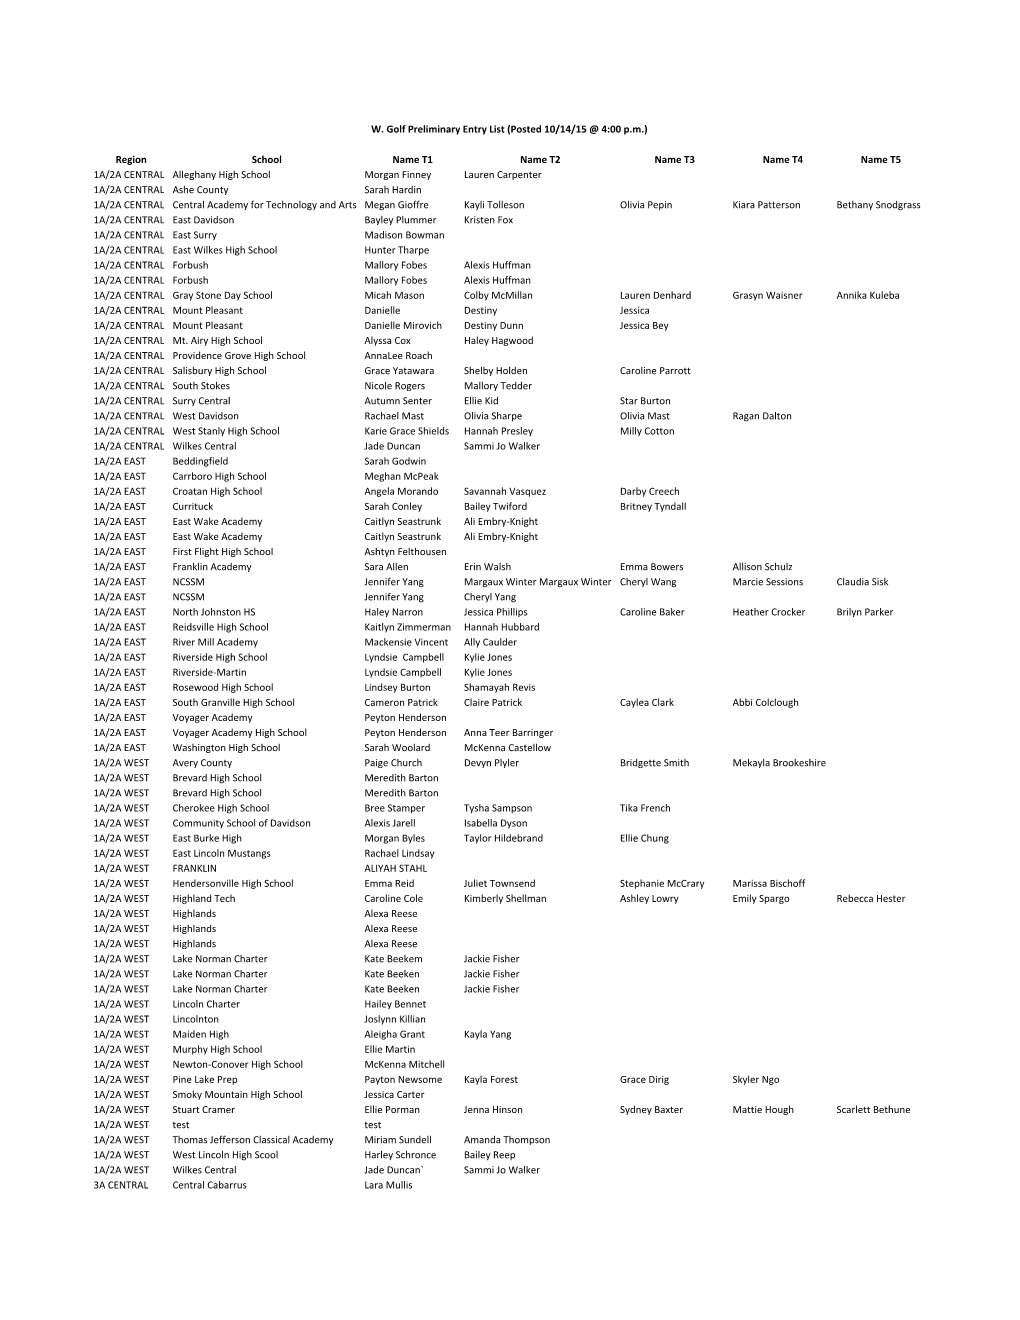 W. Golf Preliminary Entry List (Posted 10/14/15 @ 4:00 P.M.)